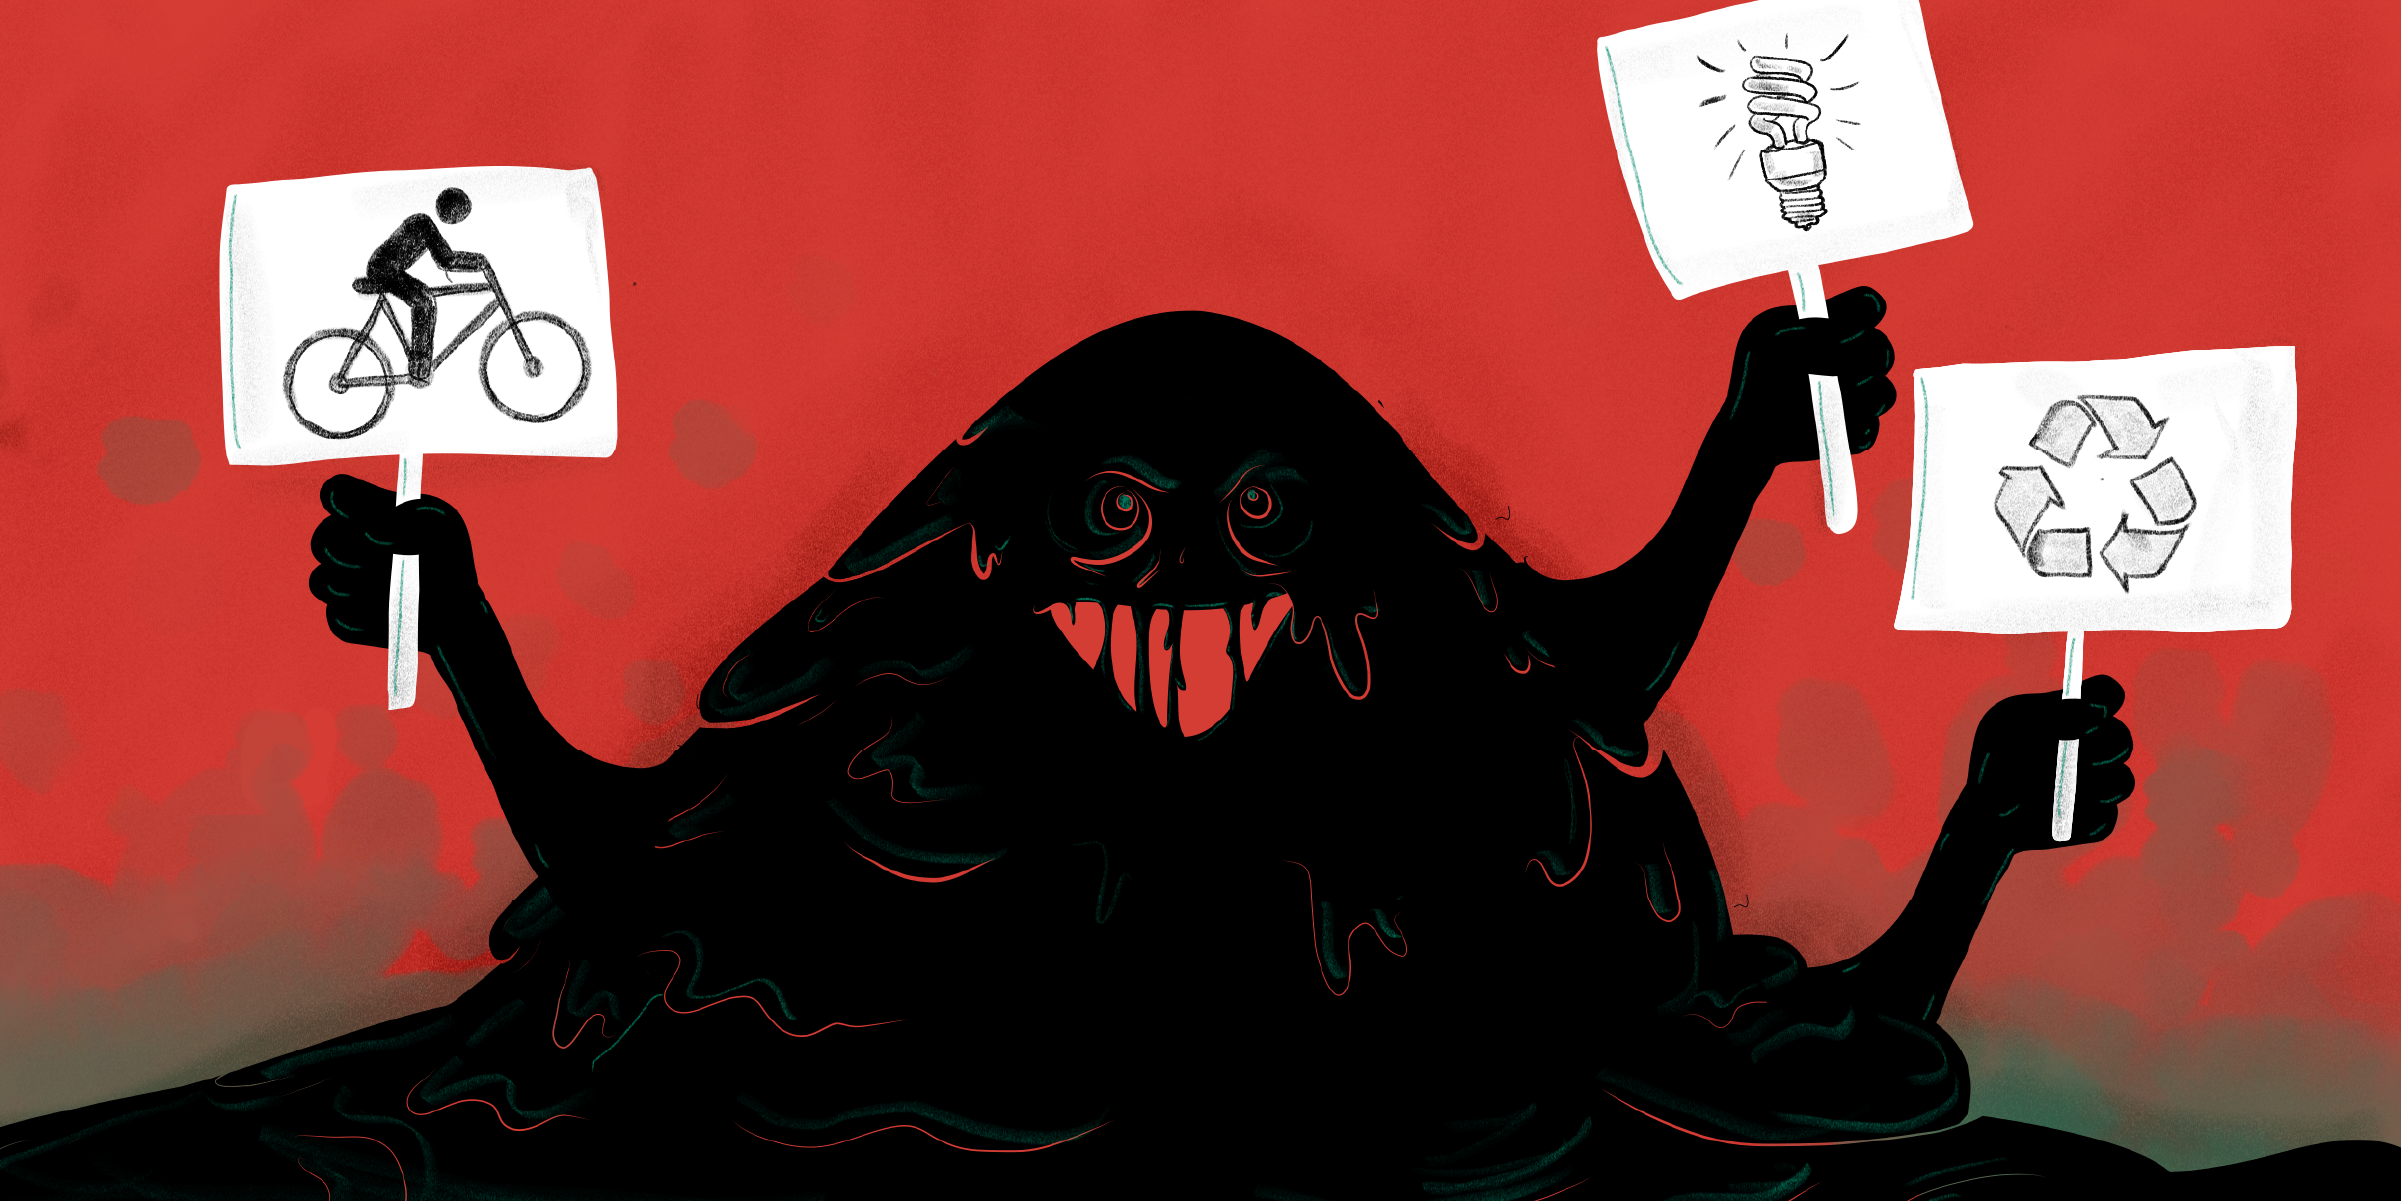 Illustration of a pollution monster holding up picket signs promoting biking, energy-efficient lightbulbs, and recycling